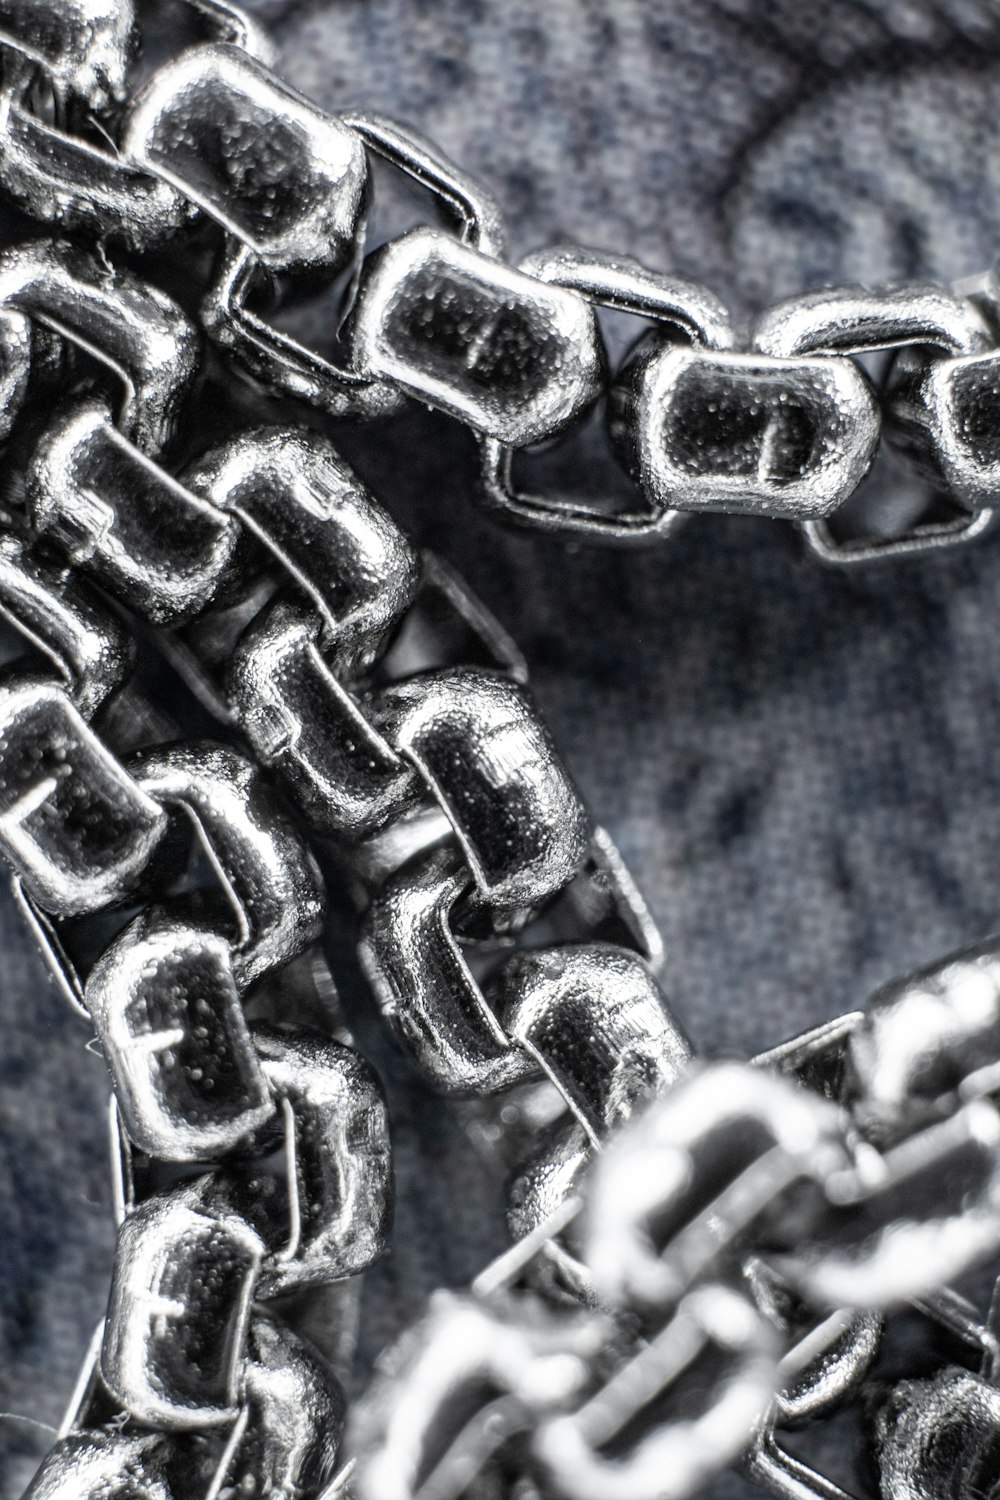 a close-up of some chain